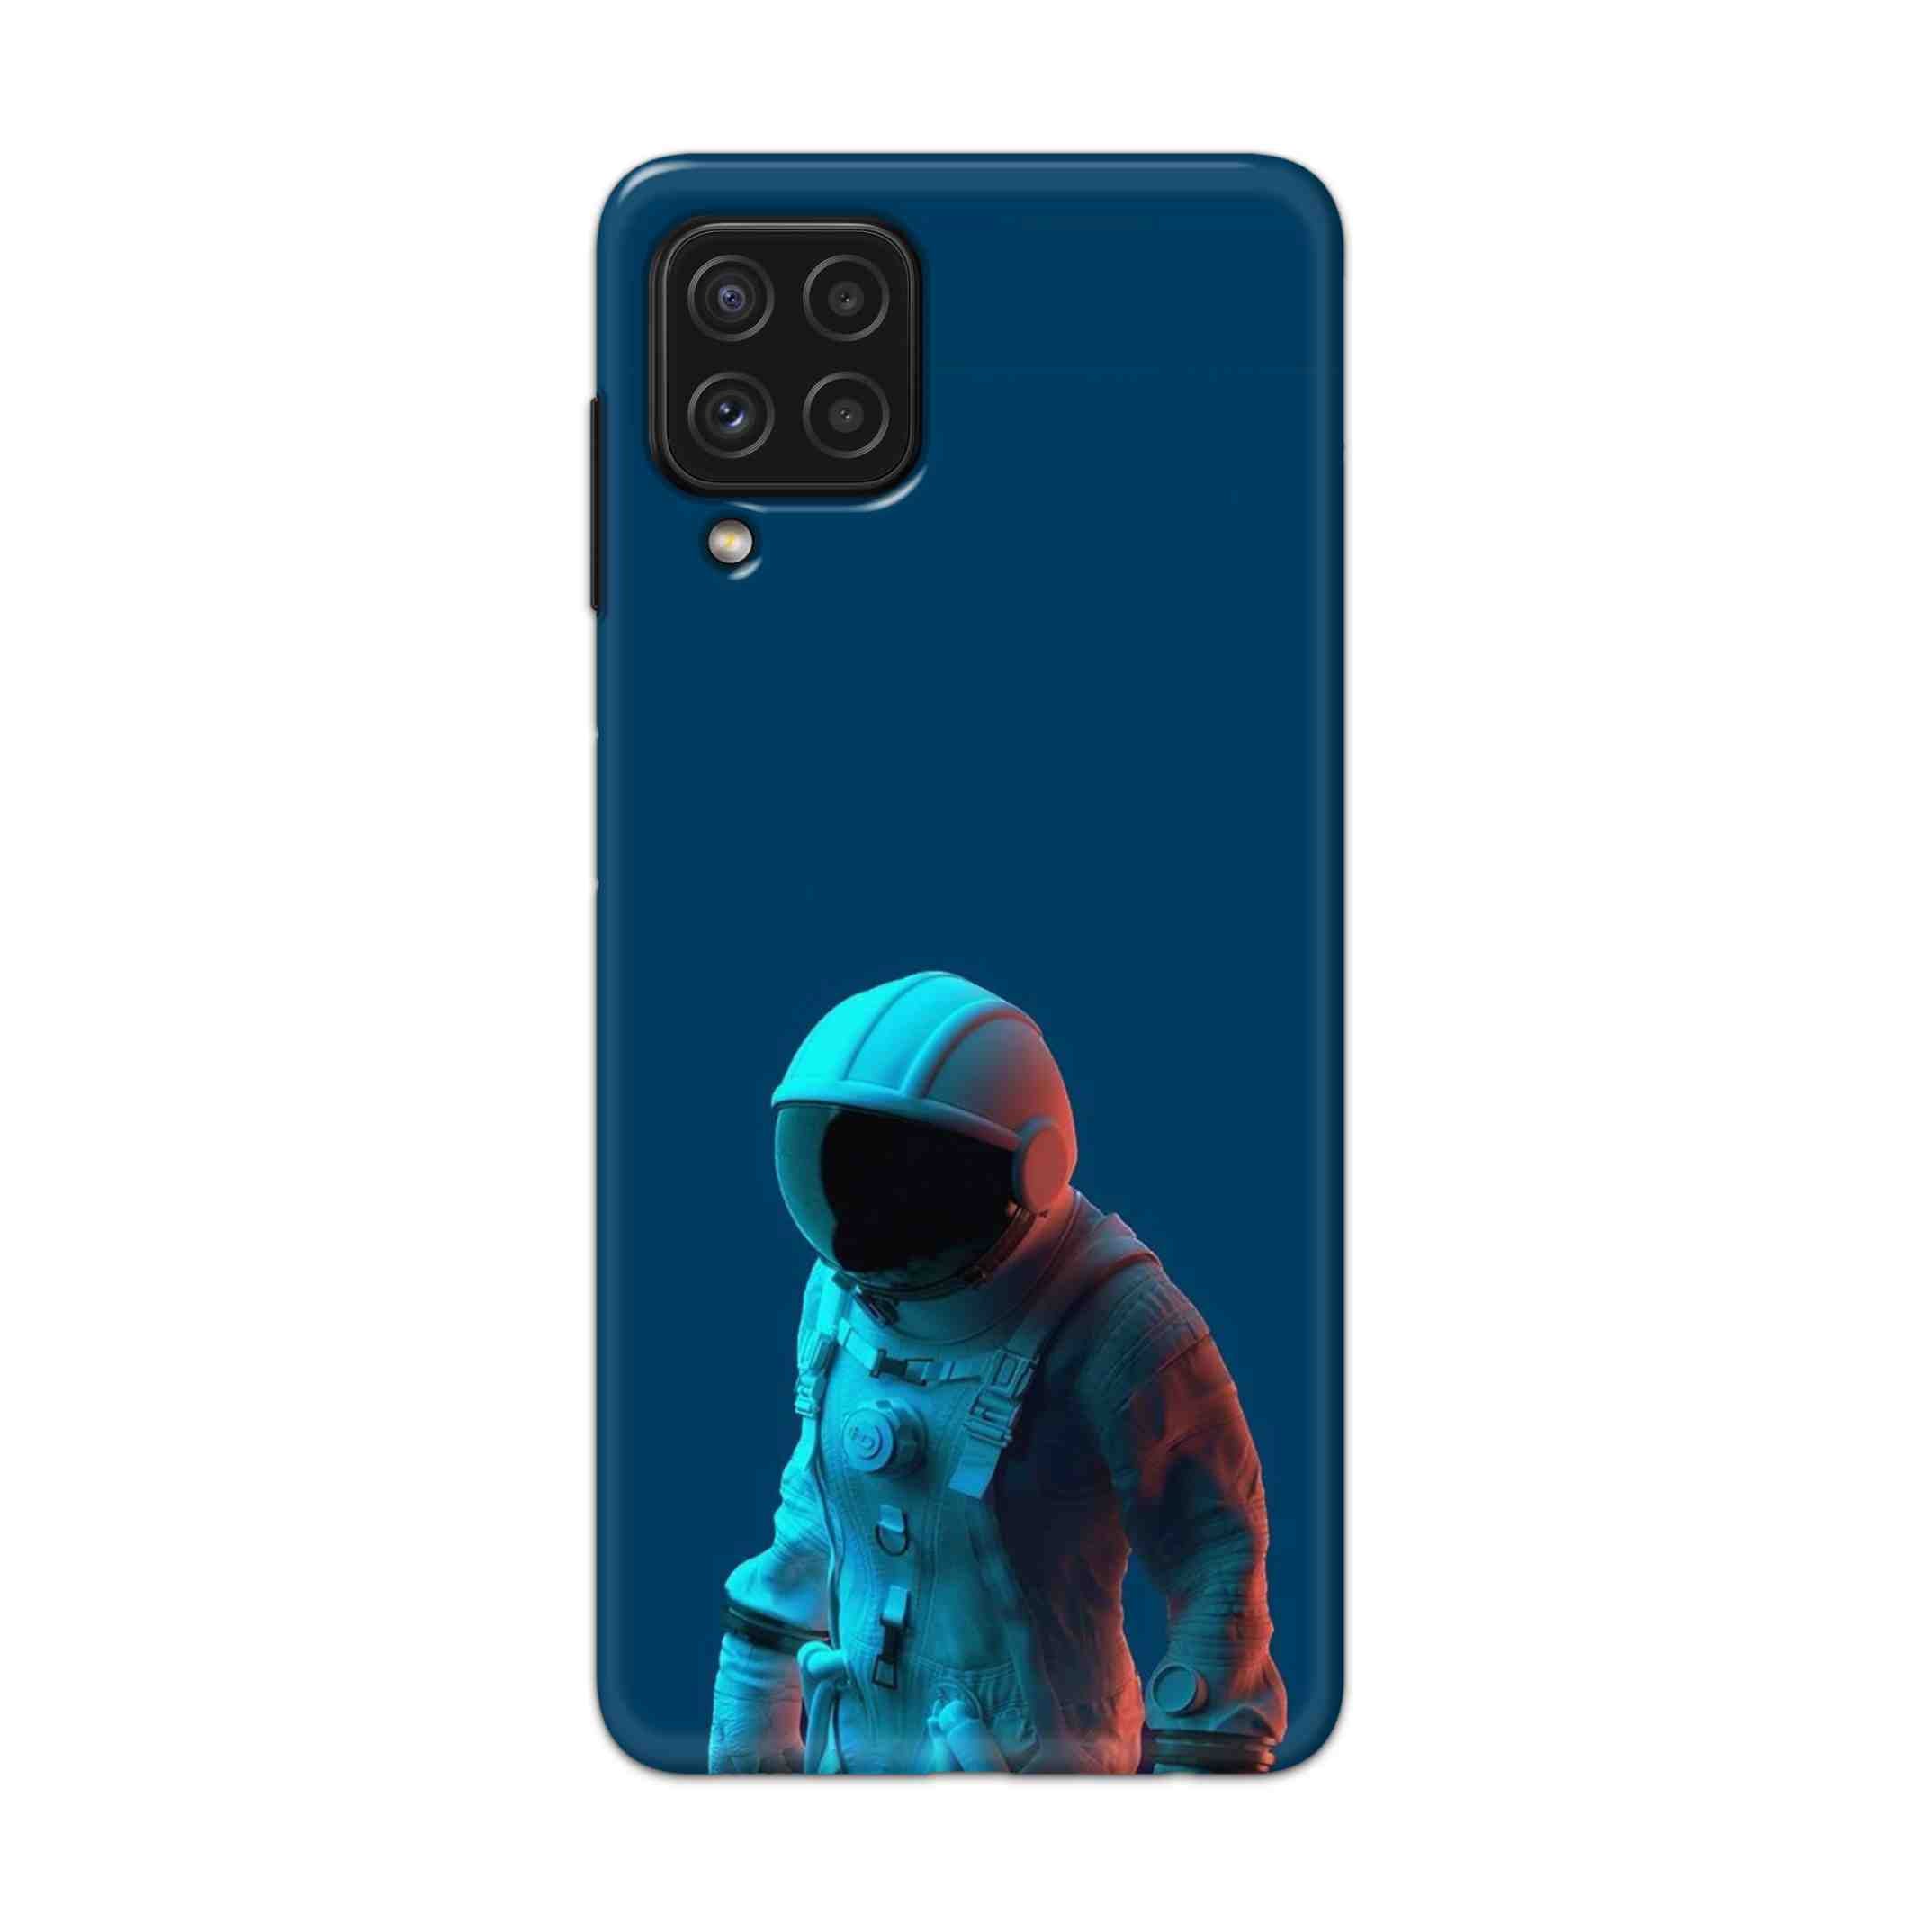 Buy Blue Astronaut Hard Back Mobile Phone Case Cover For Samsung Galaxy A22 Online